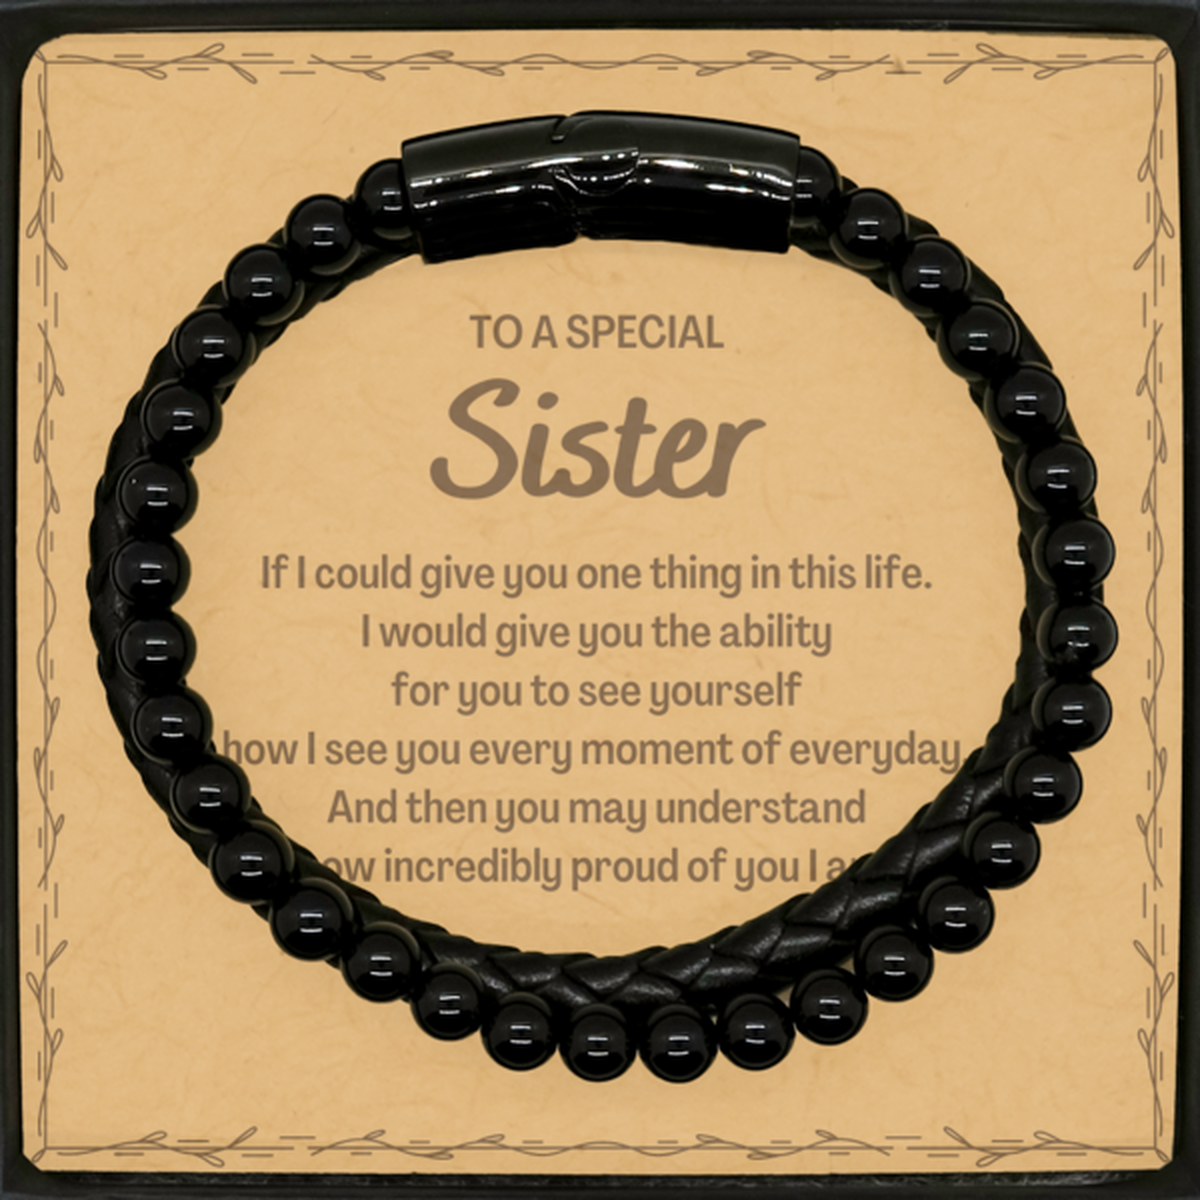 To My Sister Stone Leather Bracelets, Gifts For Sister Message Card, Inspirational Gifts for Christmas Birthday, Epic Gifts for Sister To A Special Sister how incredibly proud of you I am